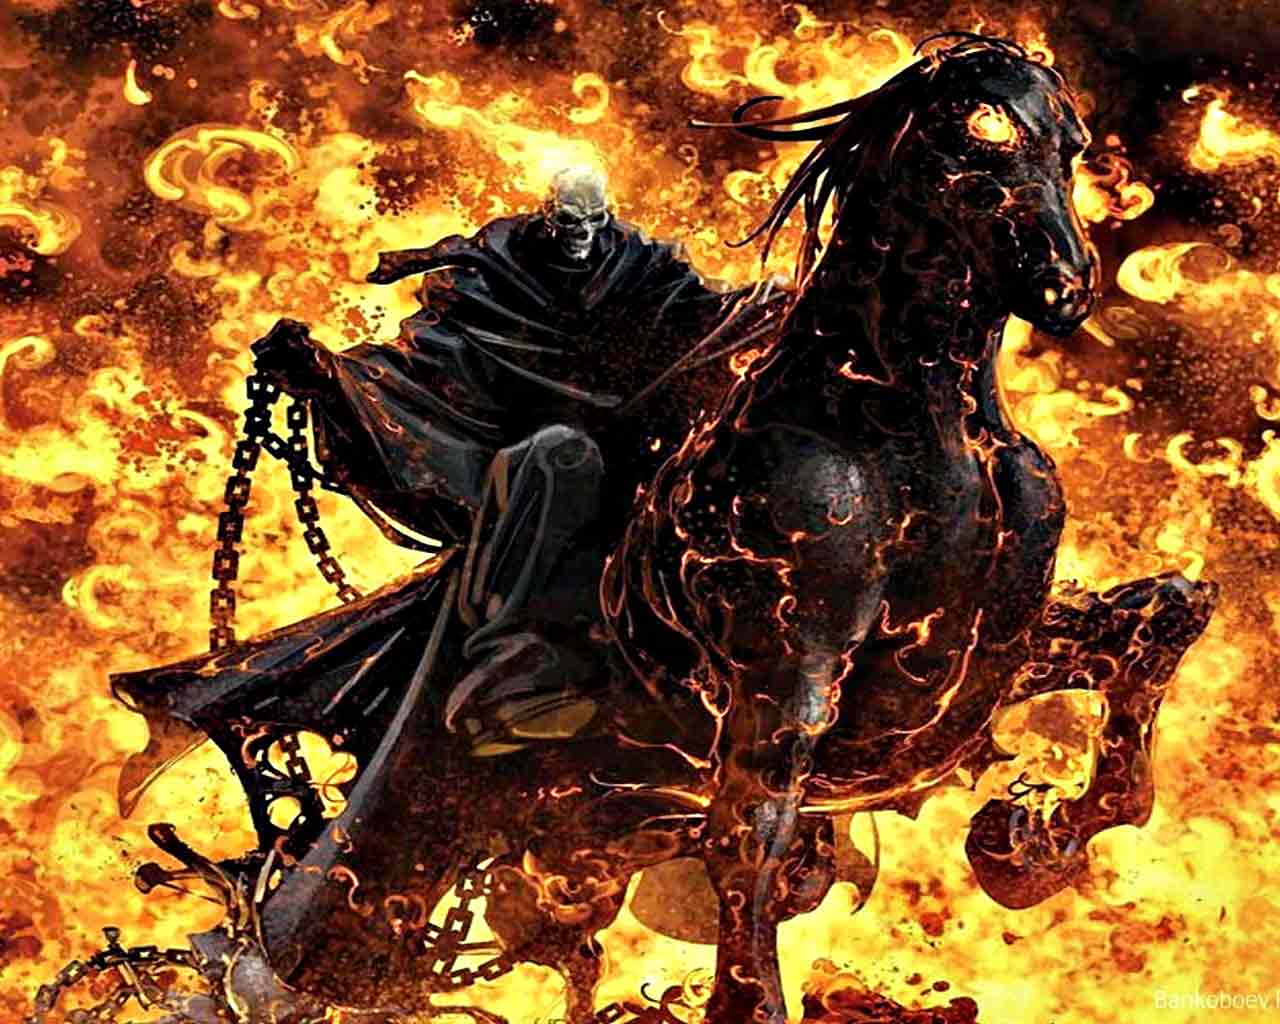 Collection of Ghost Rider Wallpaper Free Download on HDWallpaper